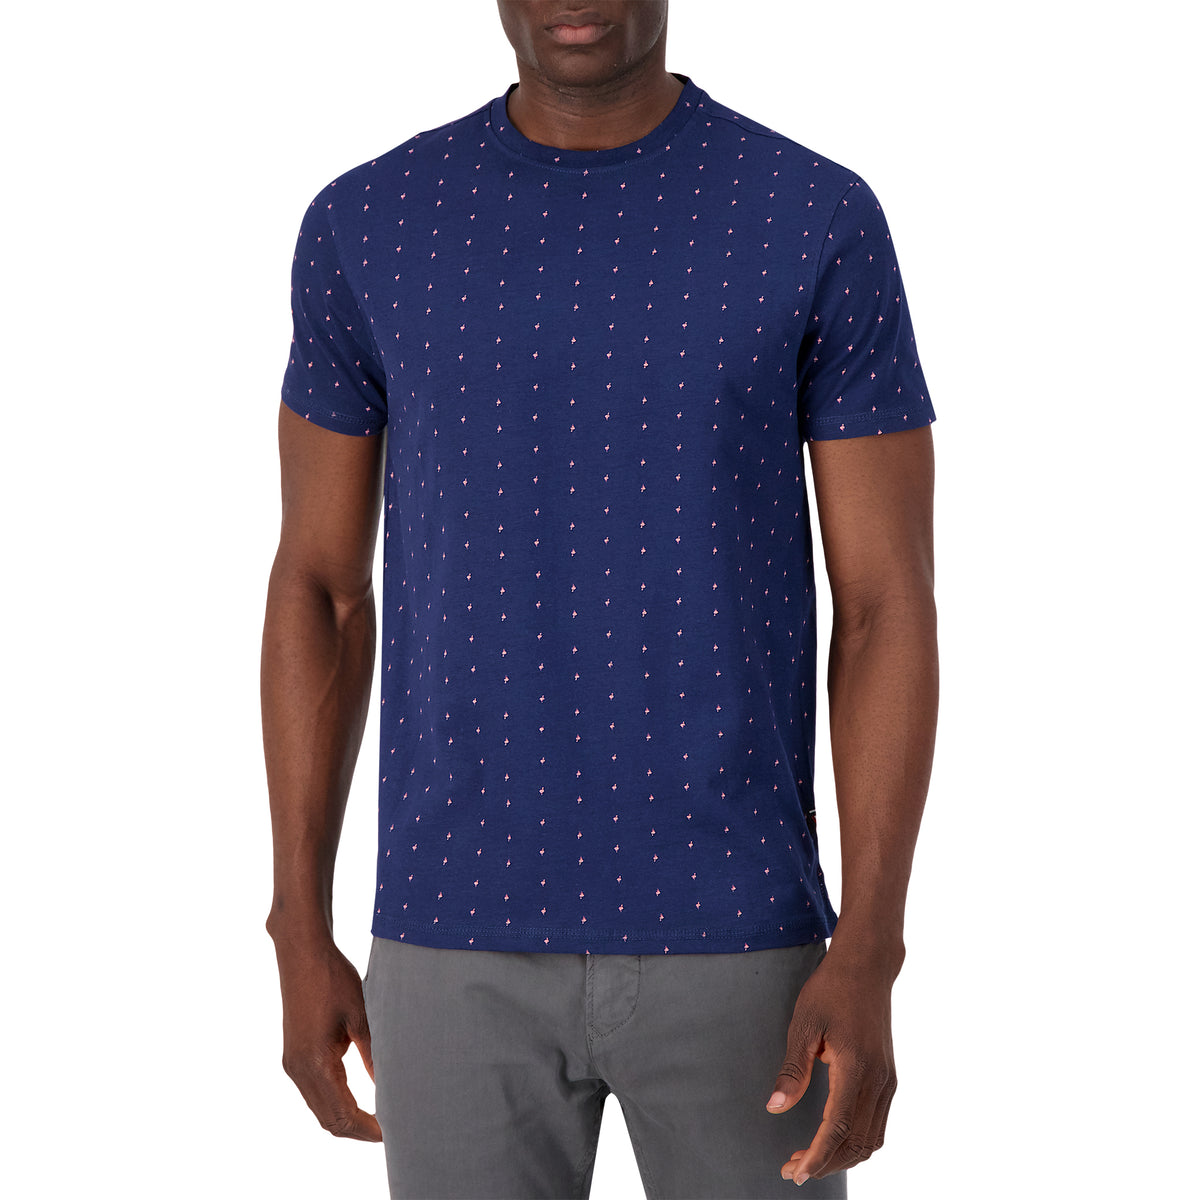 Model Front View of Short Sleeve Shirt with Flamingo Print in Navy